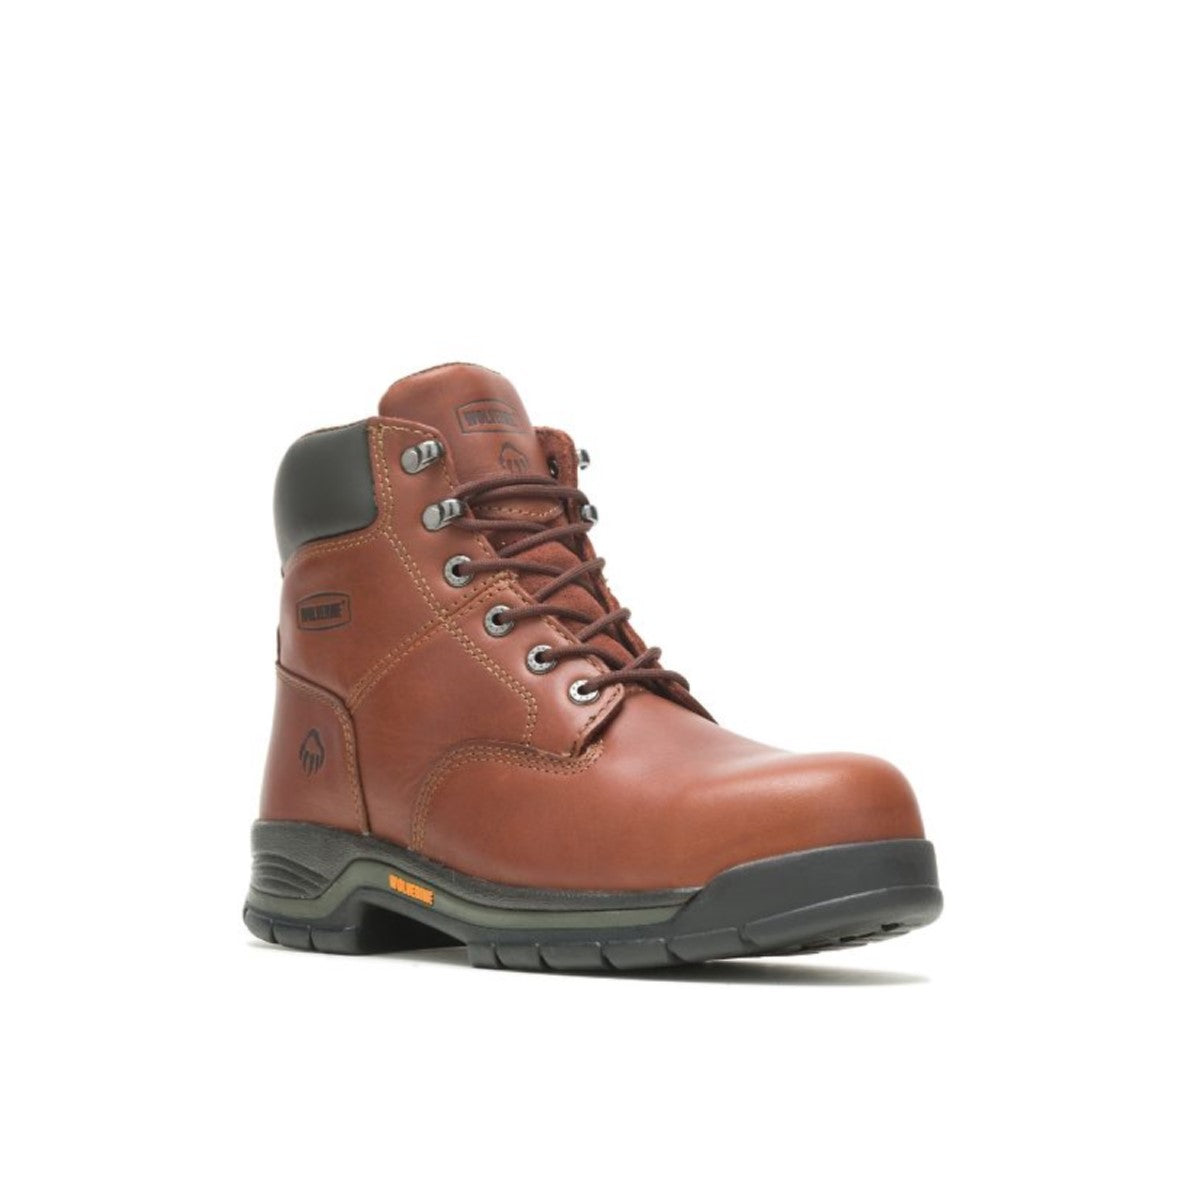 WOLVERINE W04904-EW HARRISON 6'' ST MN'S (Extra Wide) Brown Leather Work Boots